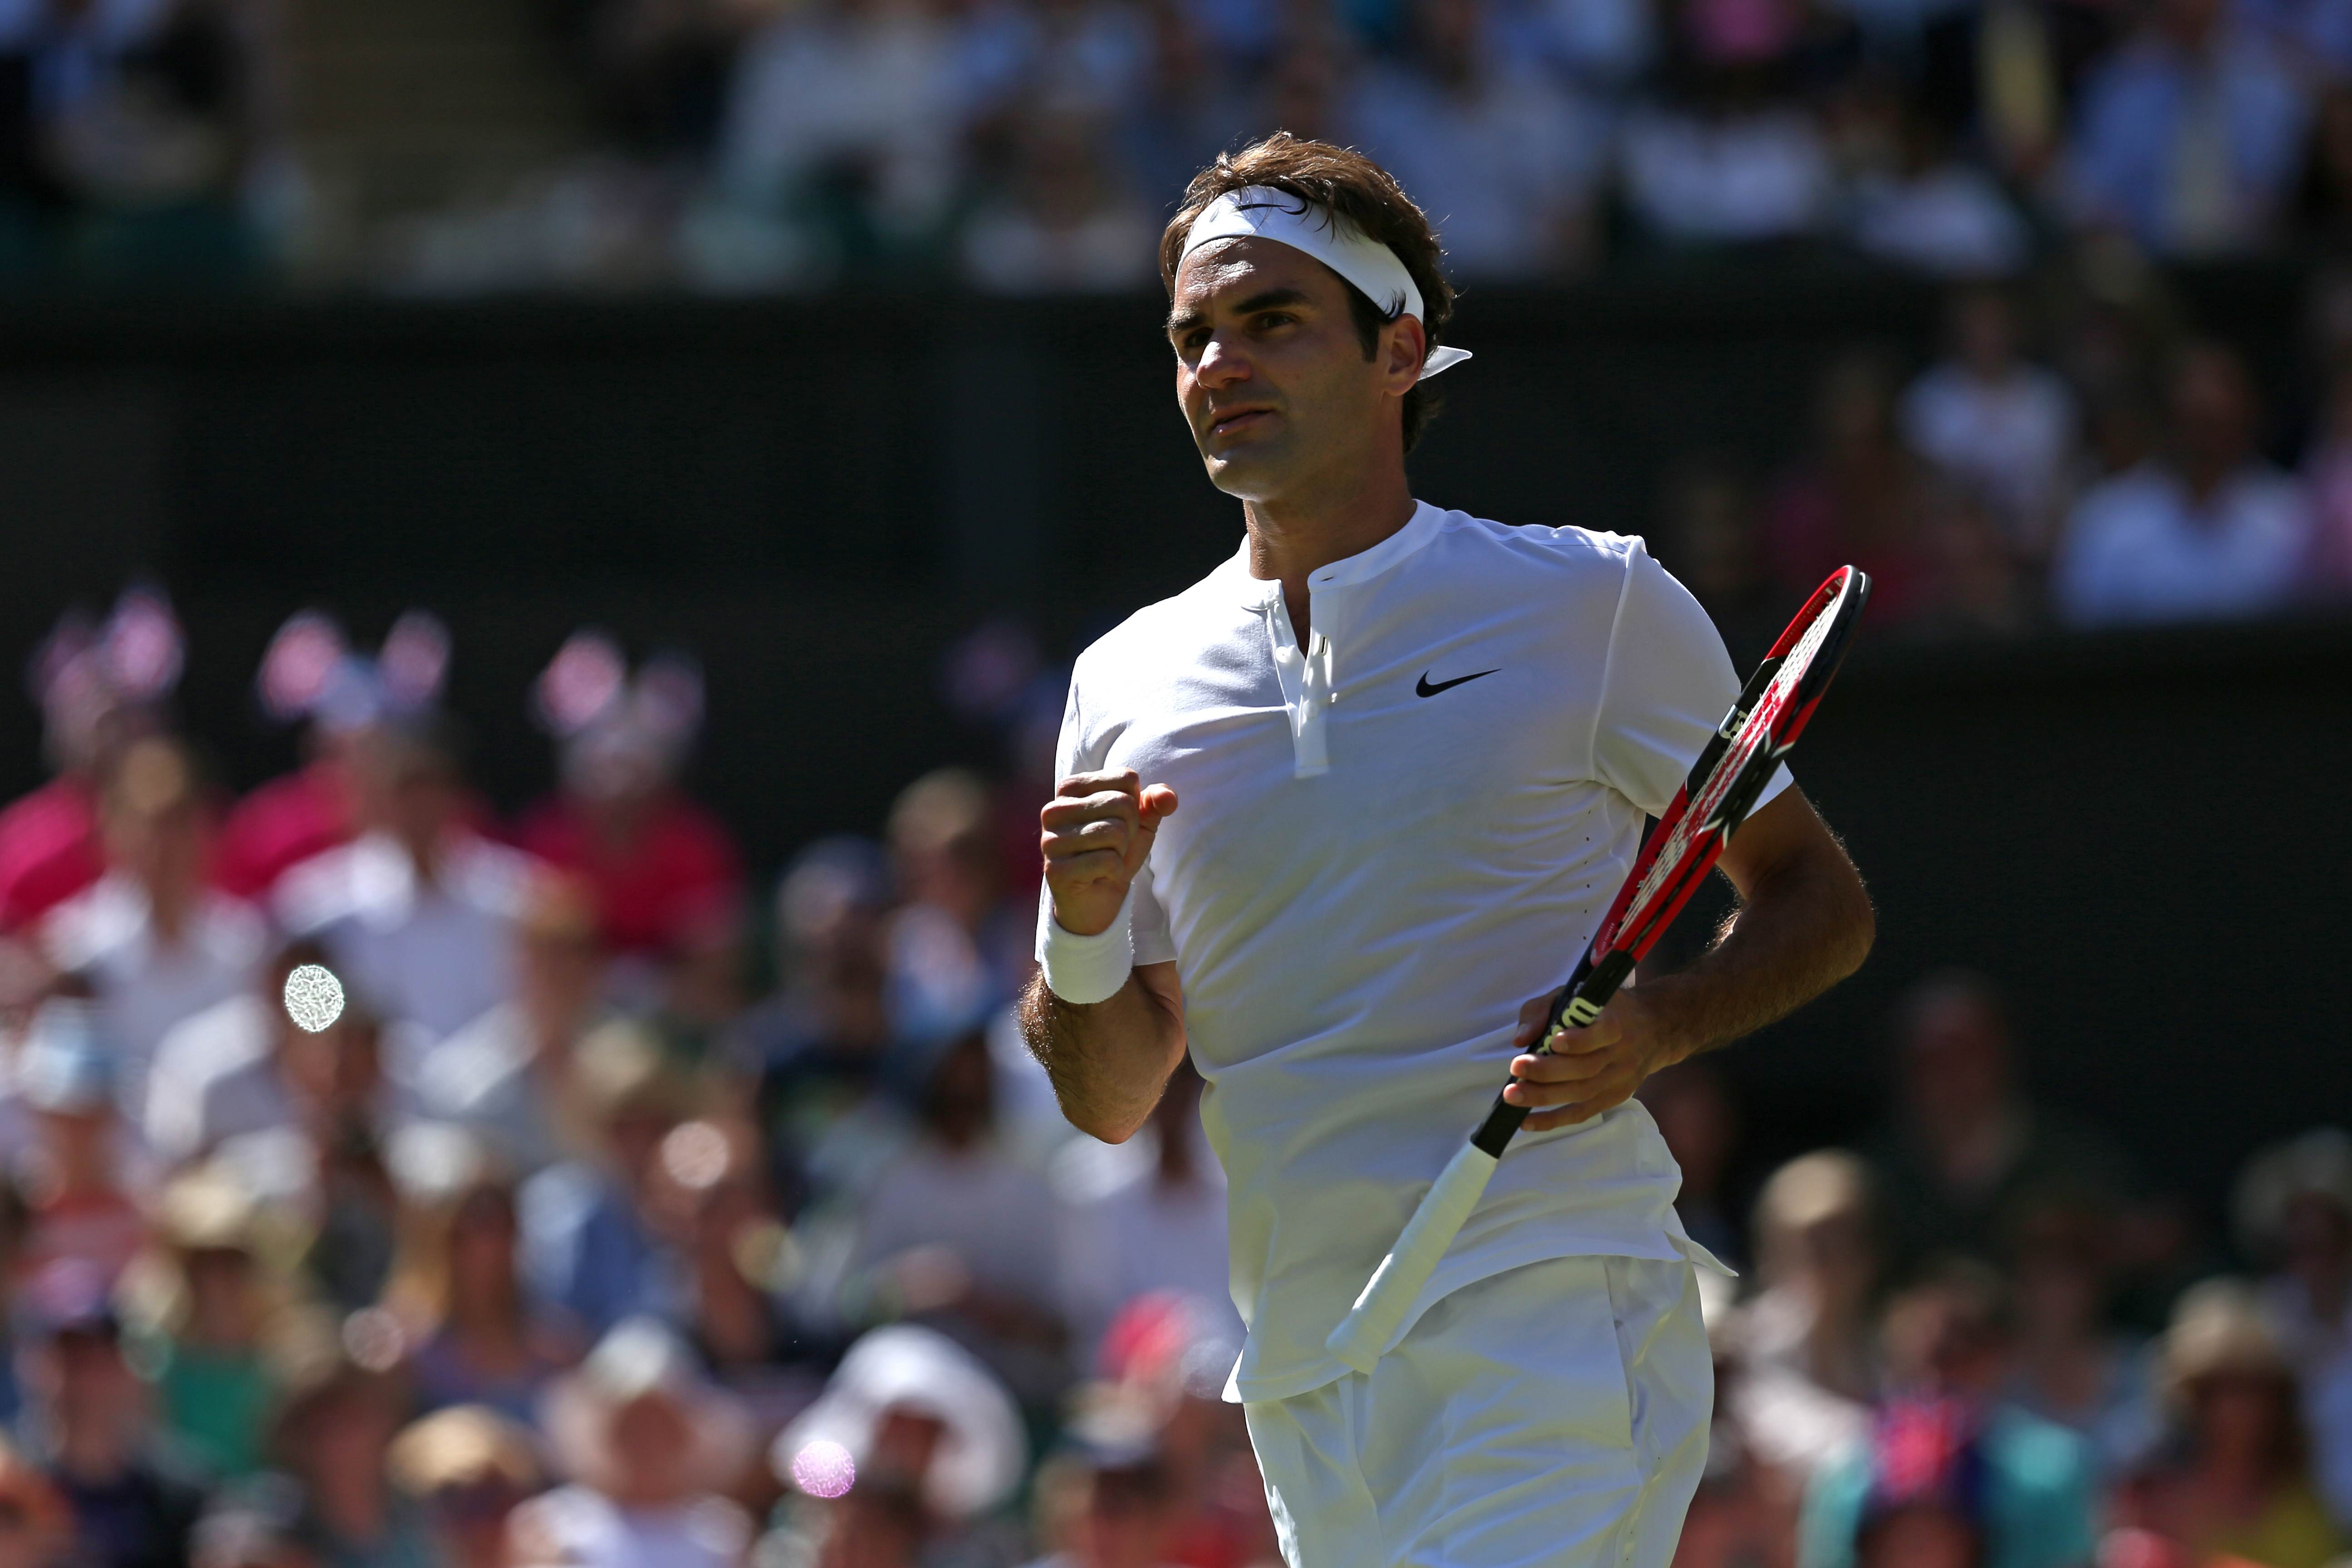 Roger Federer celebrates reaching the last 16 at Wimbledon after defeating Australia's Sam Groth. Photo: AFP